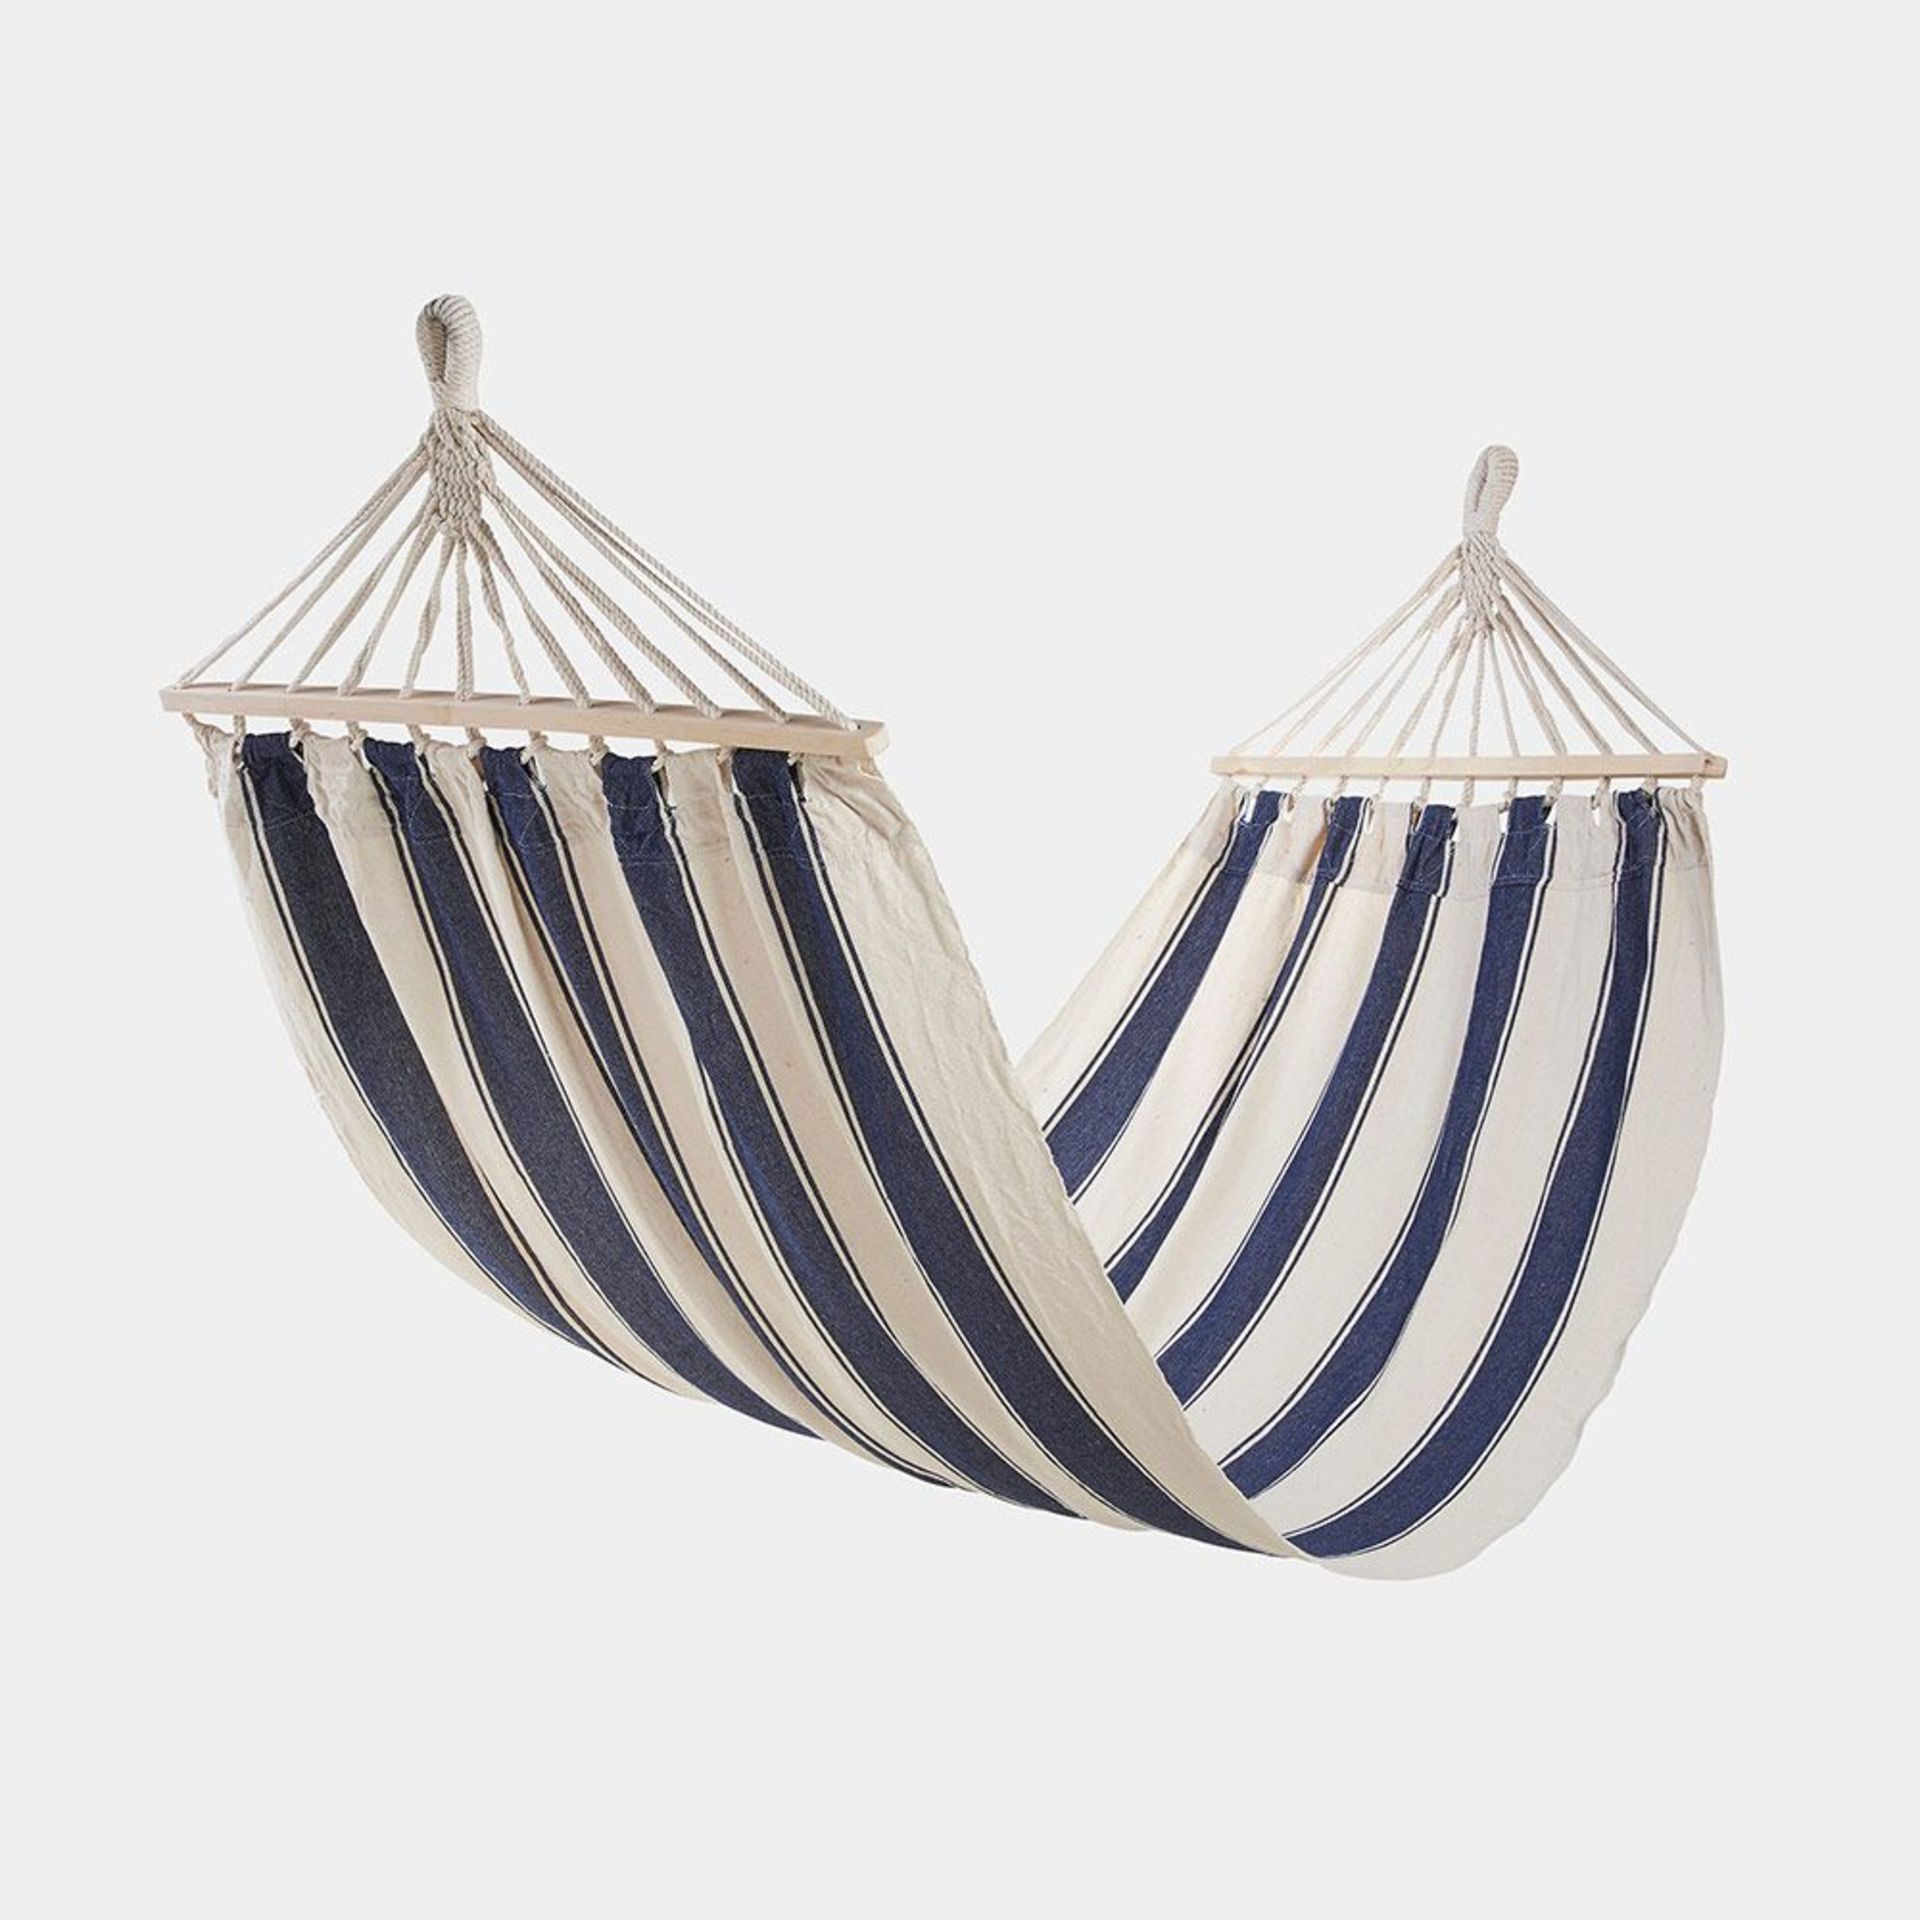 1 Person Striped Cotton Hammock. - BI. With strong, thick rope an O ring mounting point is used to